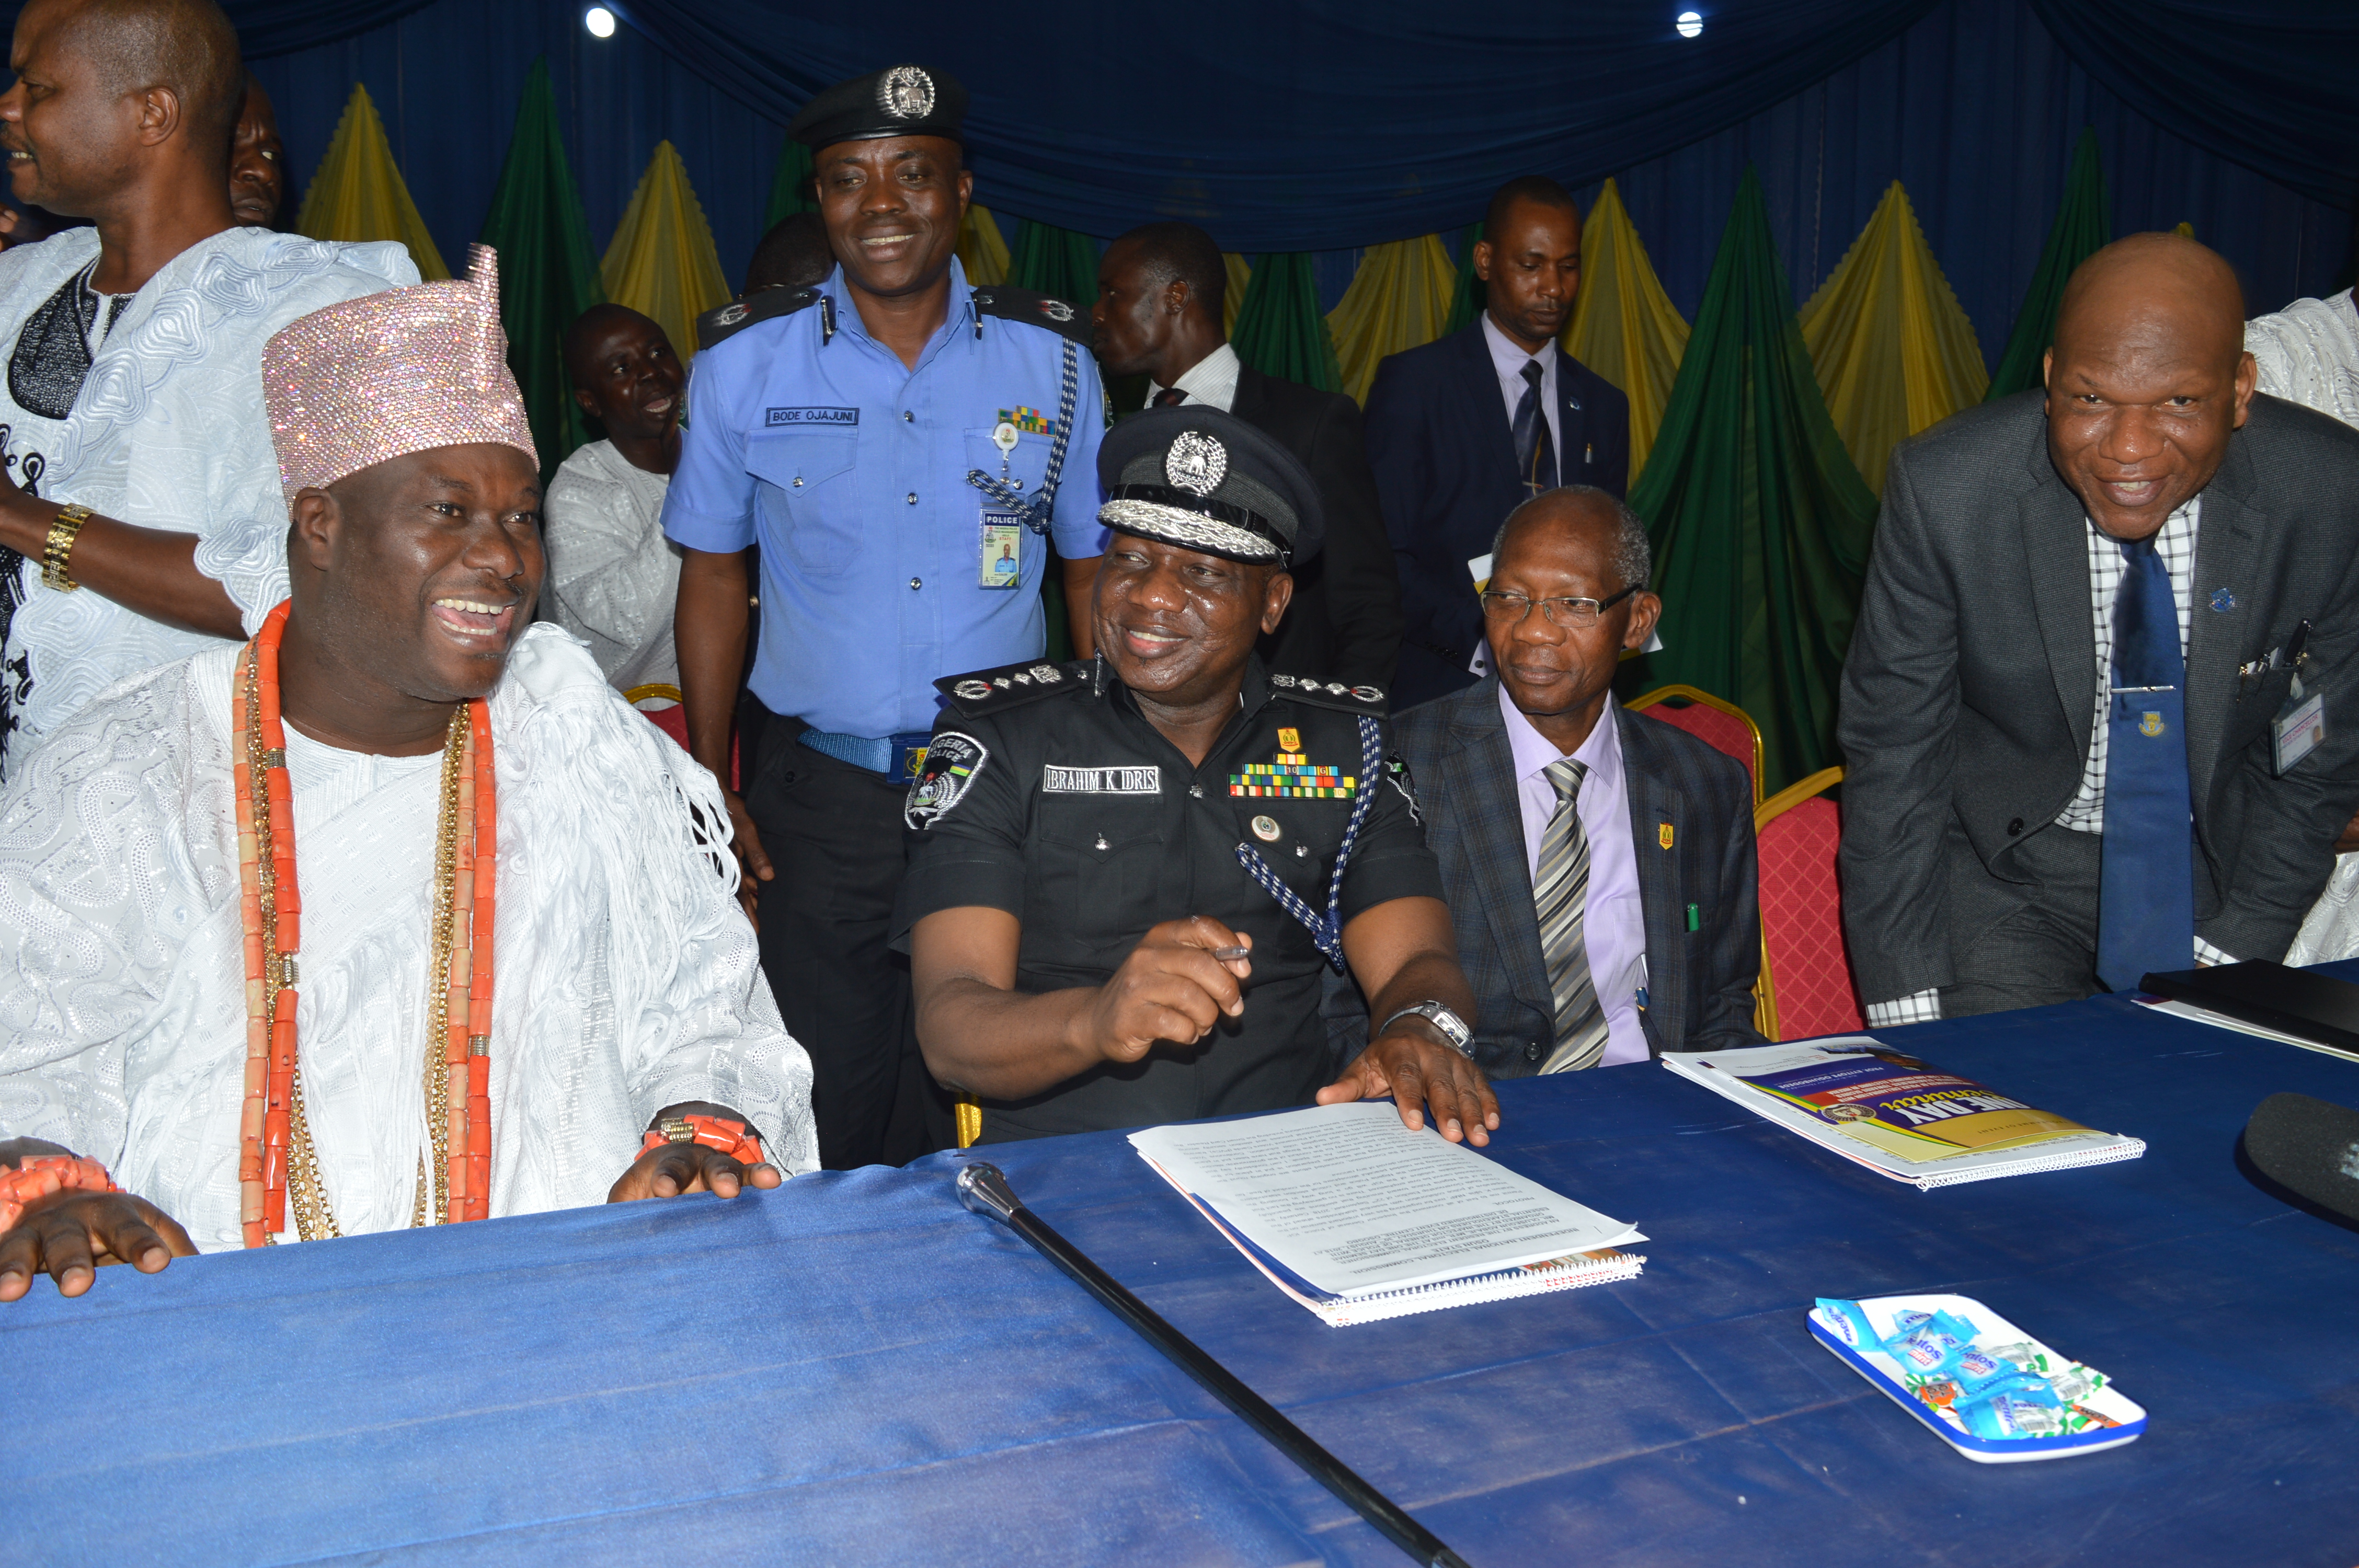 From left: The Ooni of Ife, Oba Enitan Adeyeye Ogunwusi; the Inspector General of Police, Mr Ibrahim Idris, the INEC REC in Osun, Mr Segun Agbaje, and the VC, Obafemi Awolowo University, Prof Eyitayo Ogunbodede today at a One-Day seminar on security towards a peaceful September 22 Gubernatorial Election in Osun State.